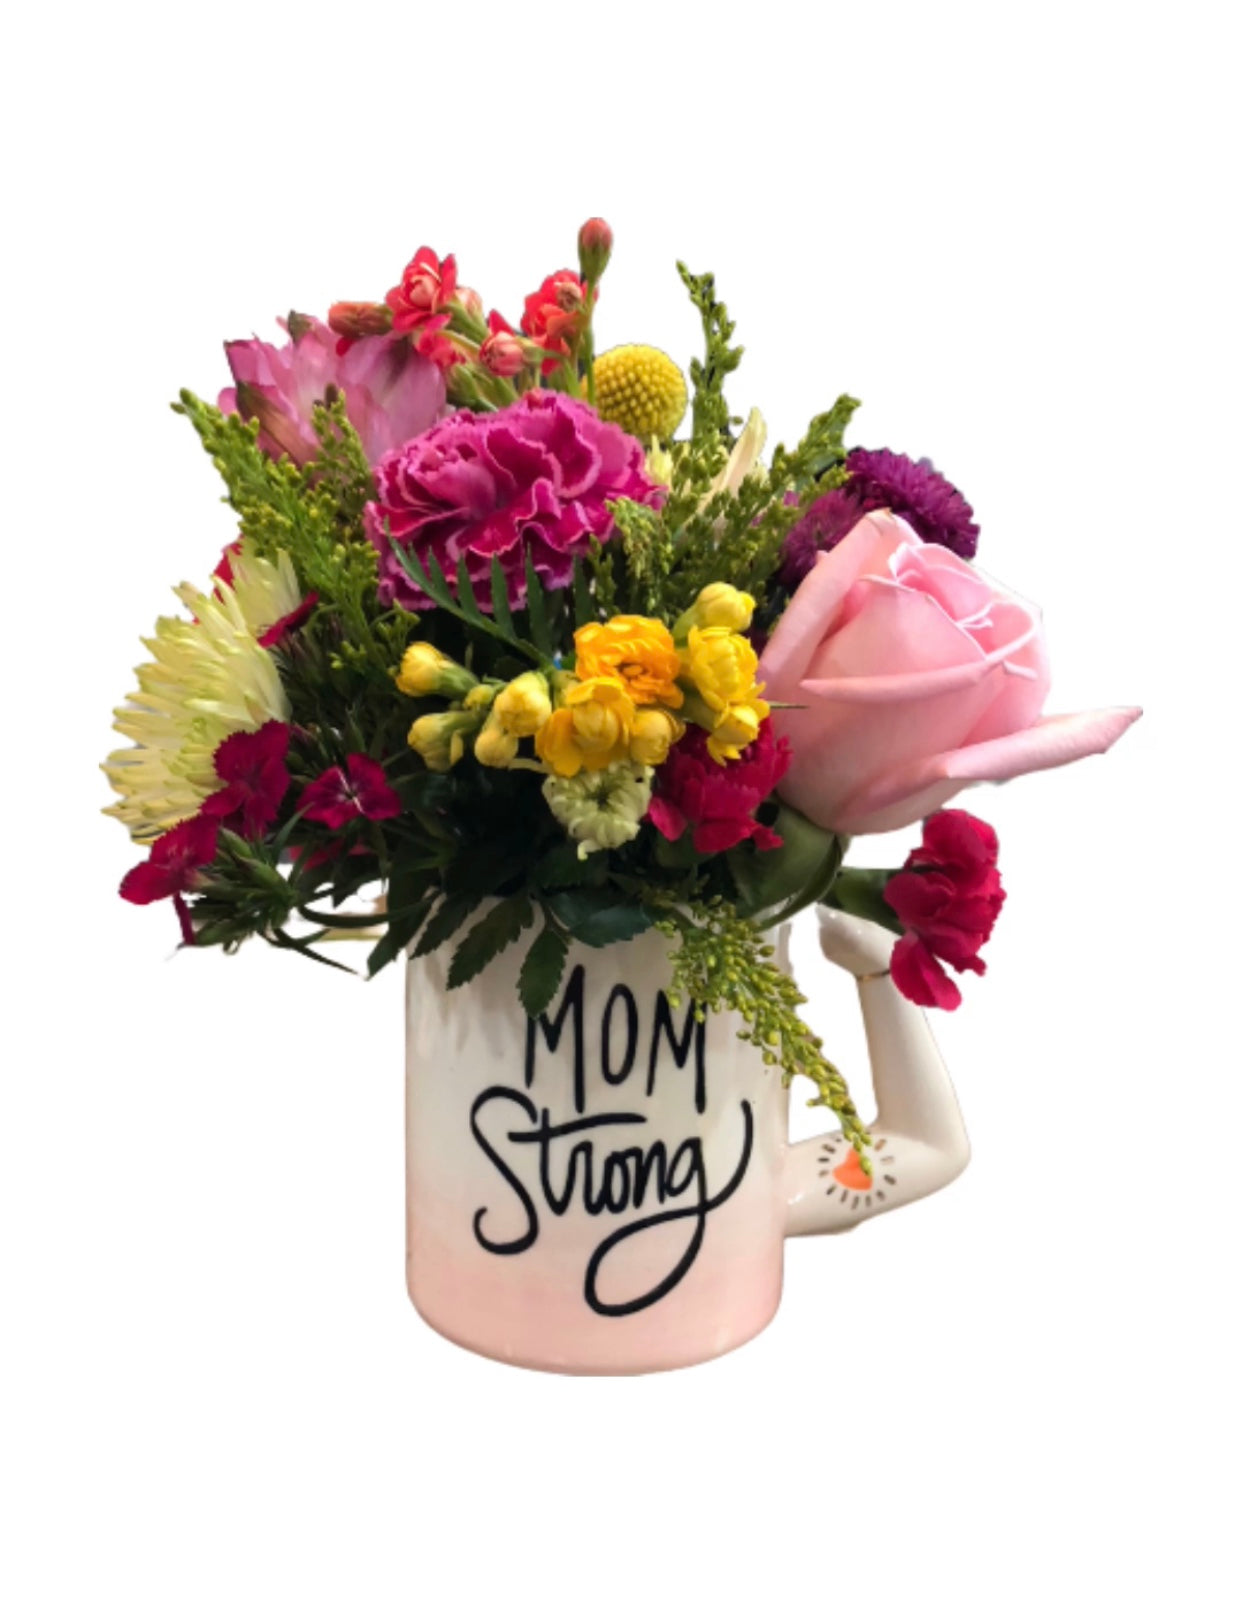 Mom Strong Mother's Day Arrangement